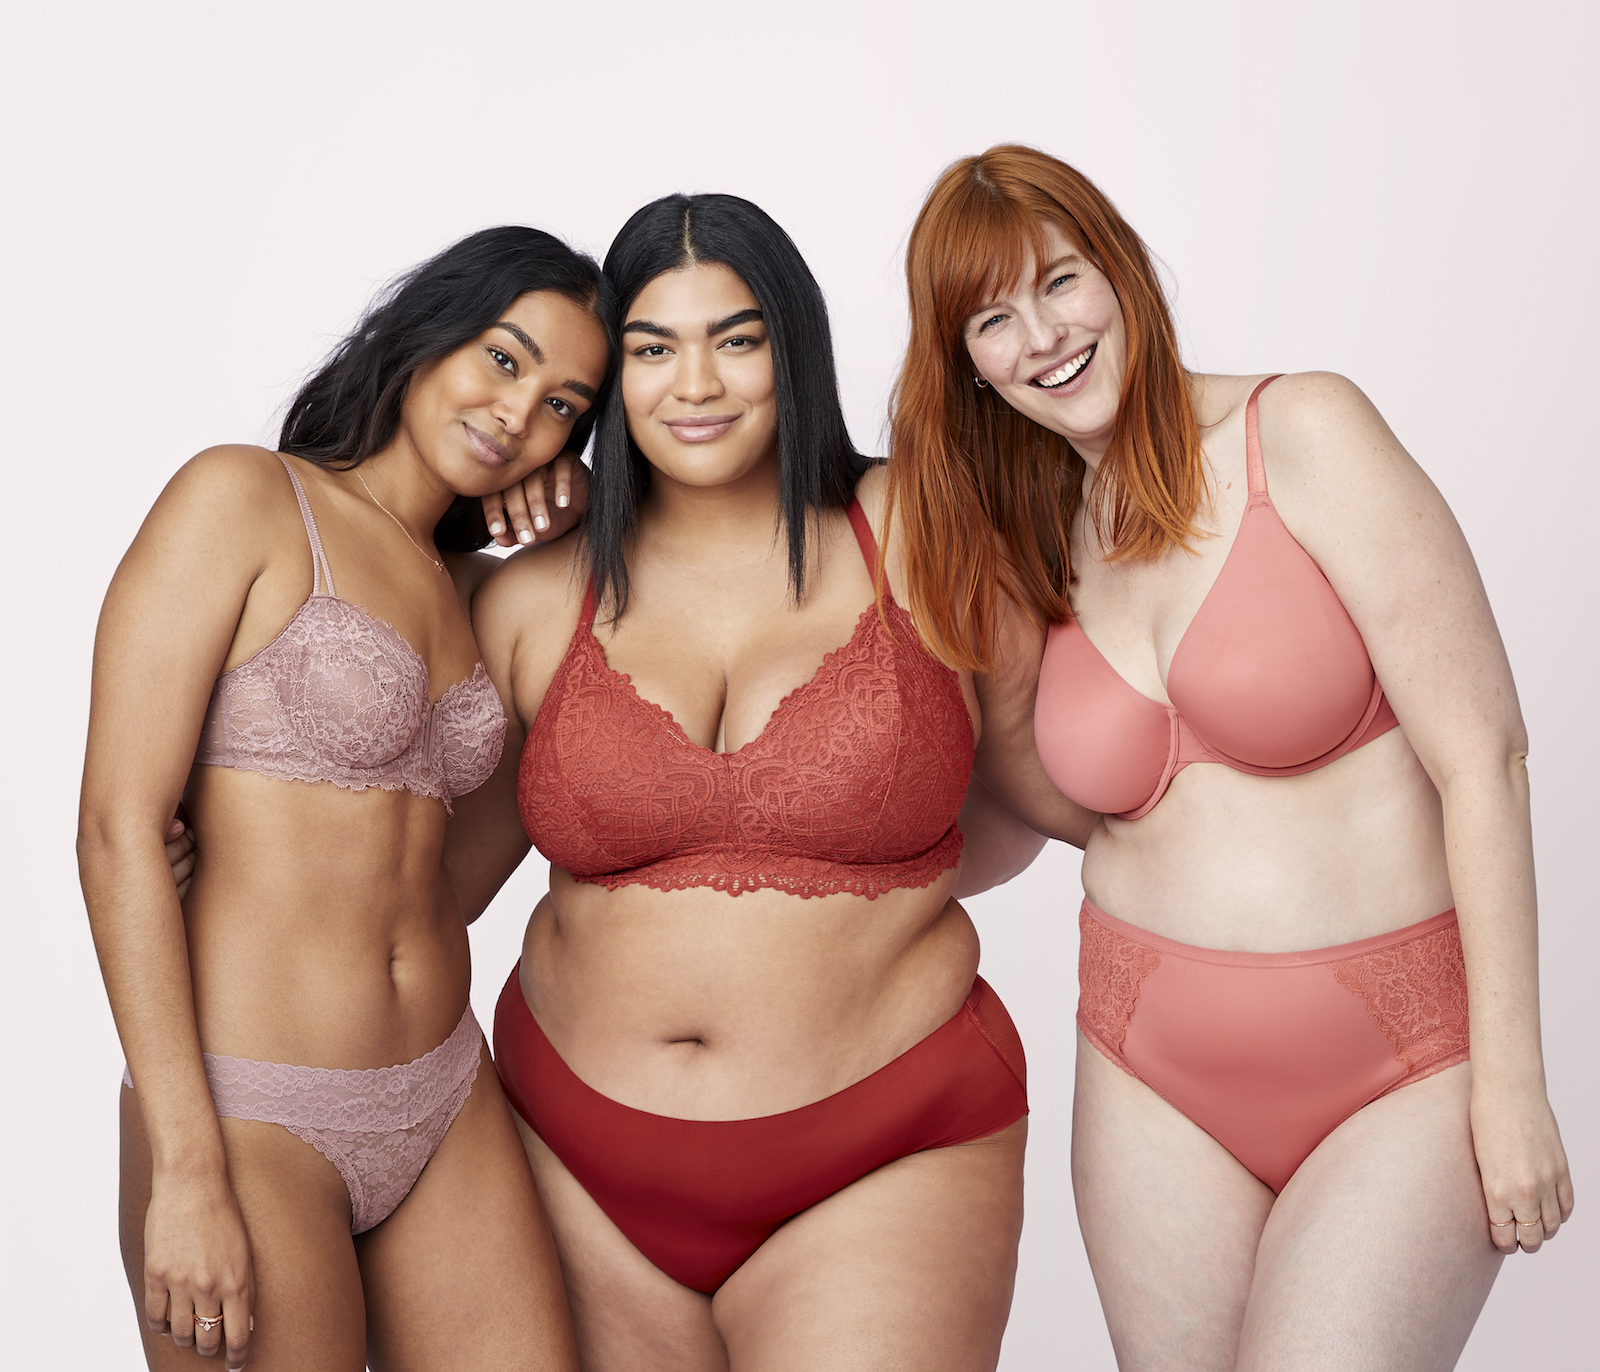 Target forays deeper into private-label with new lingerie line - Digiday